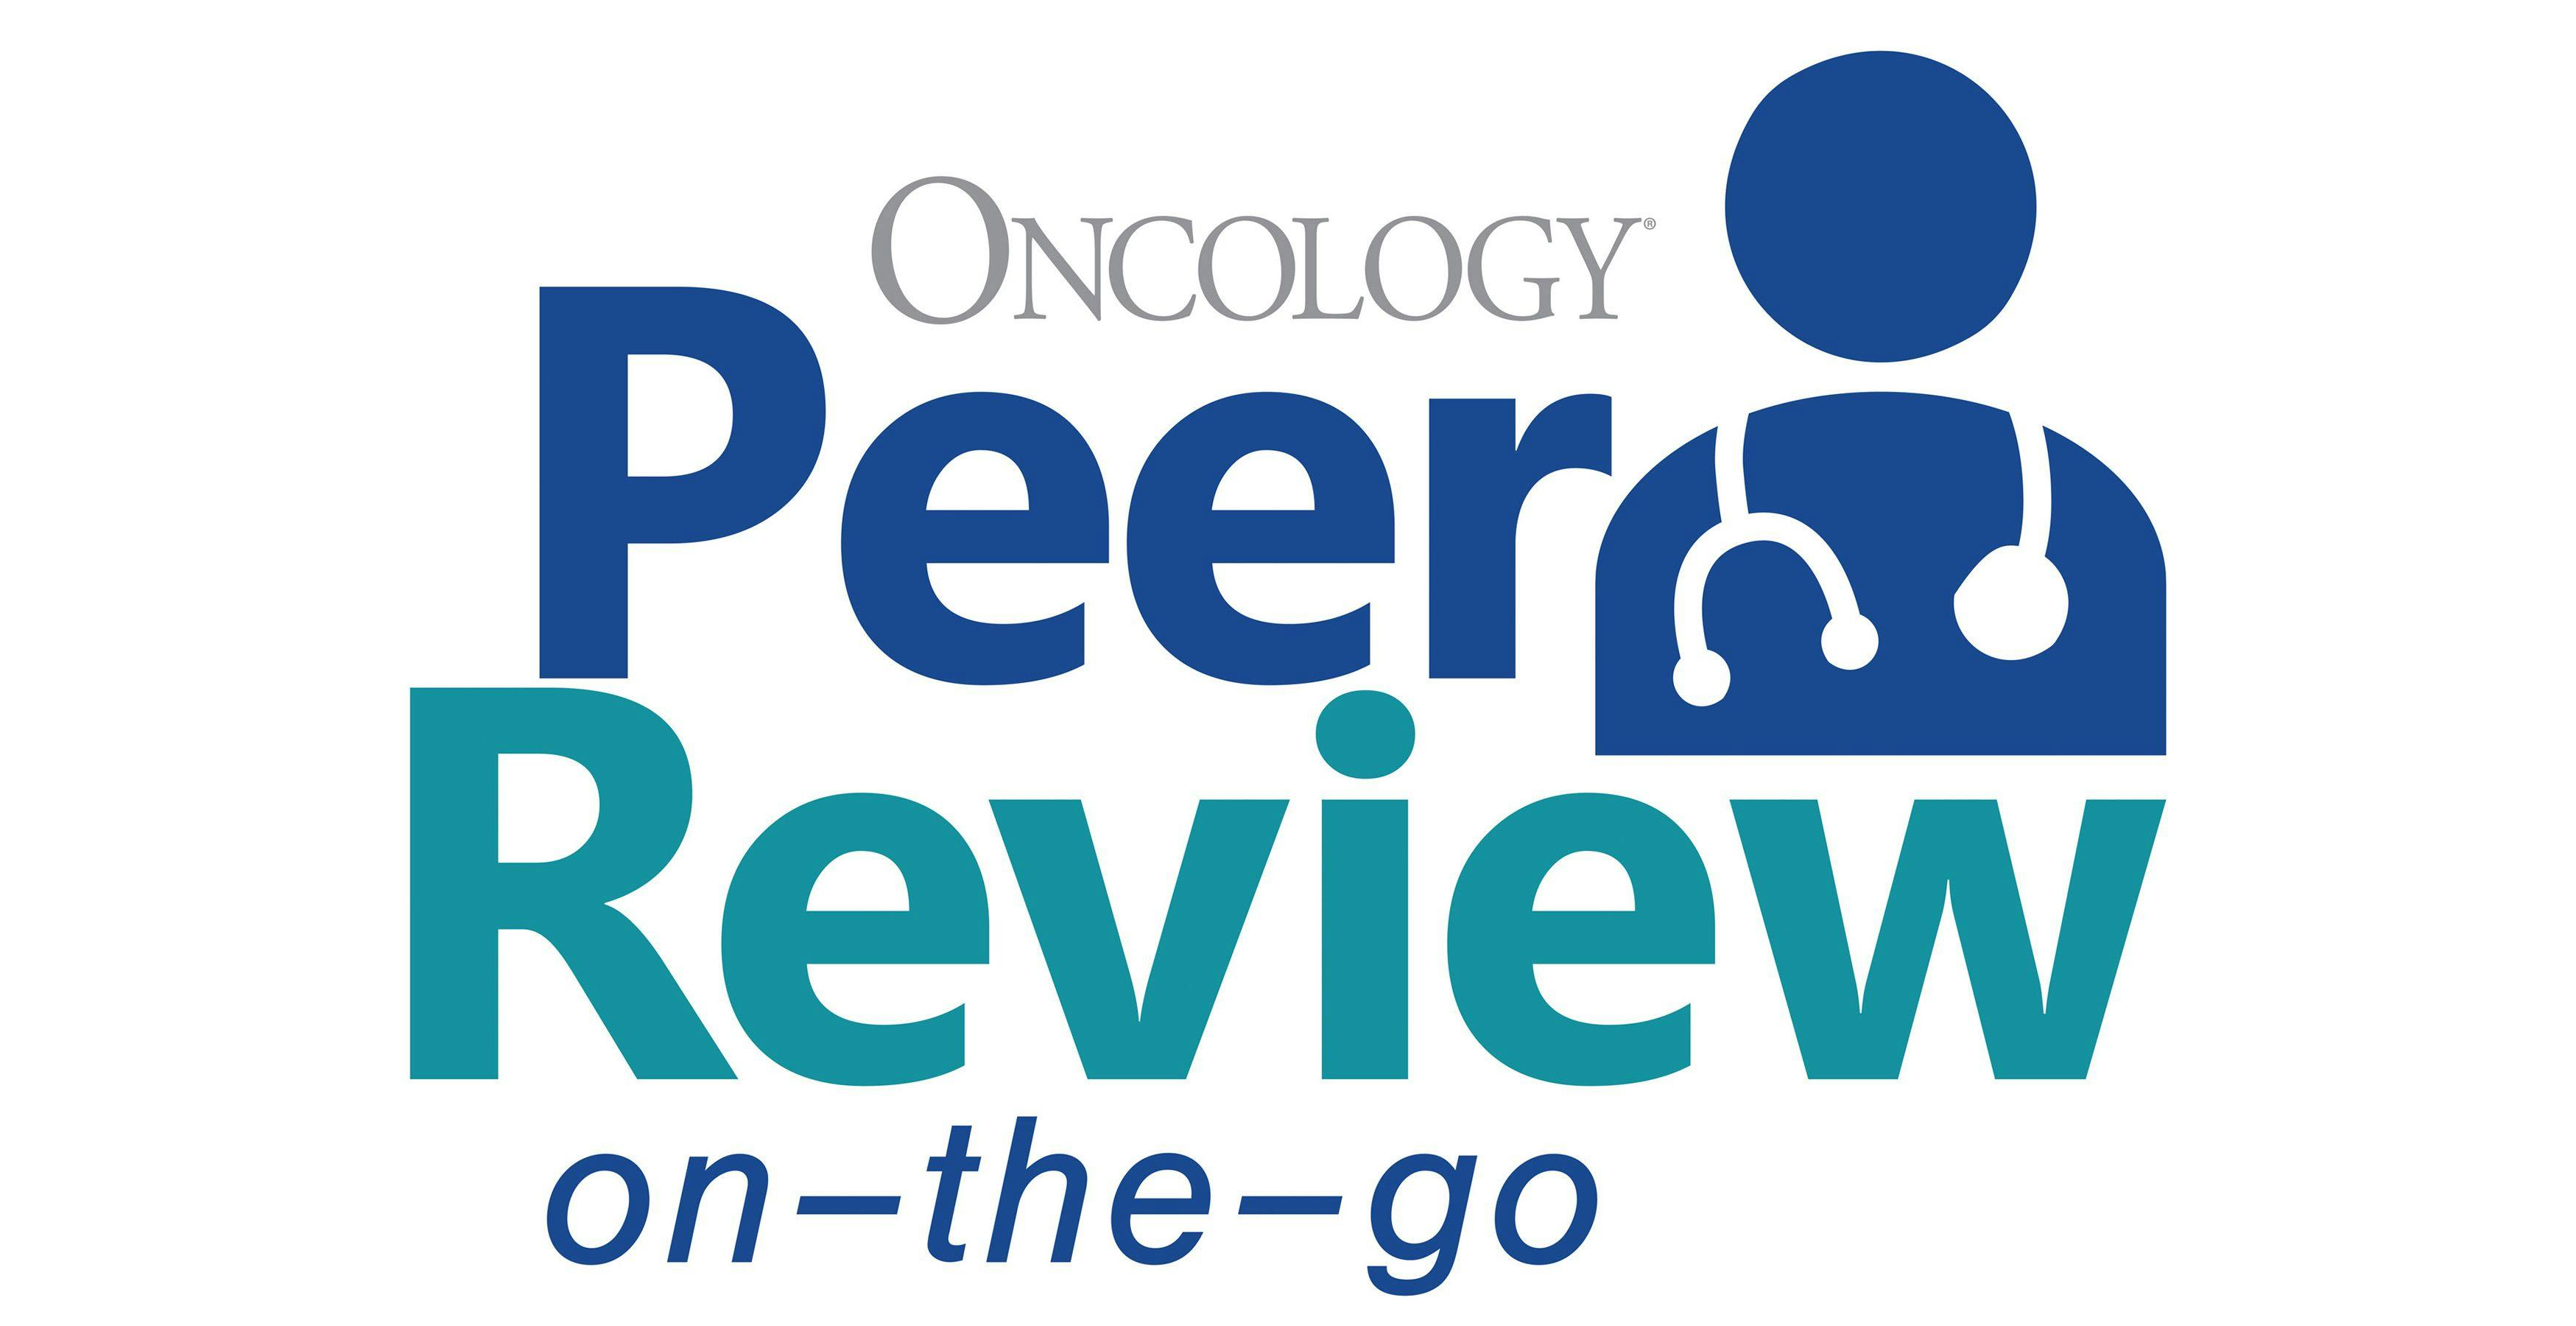 The recent episode of the "Oncology Peer Review On-The-Go" podcast features Alexandra Sokolova, MD, discussing her article on germline testing and NCCN guidelines for patients with prostate cancer.